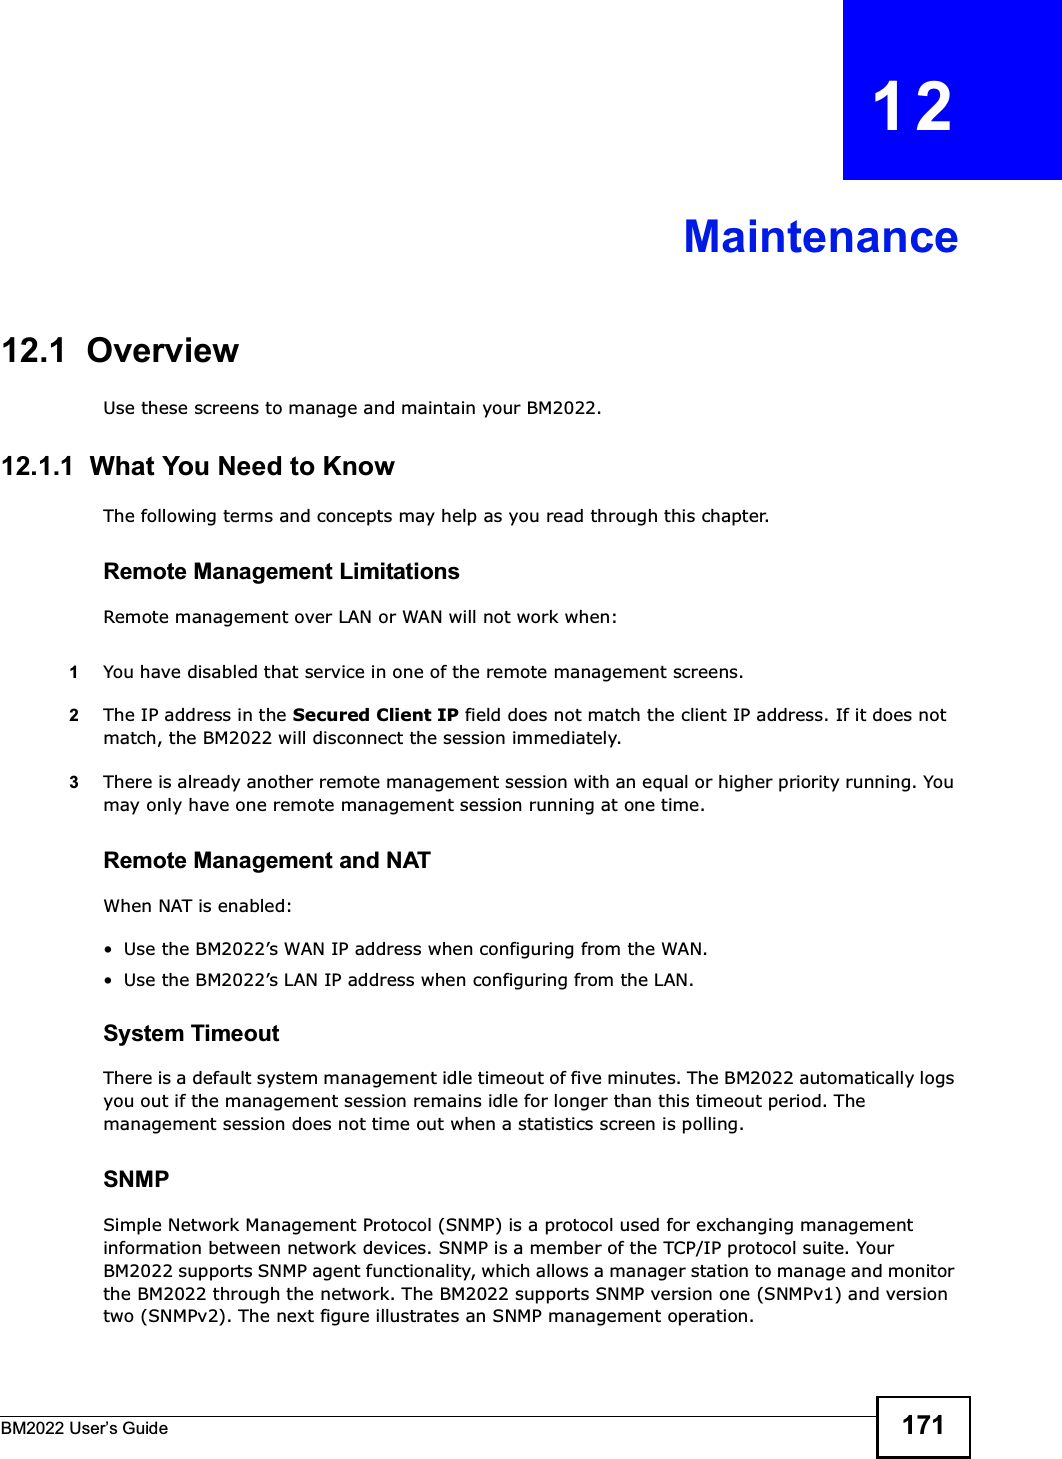 BM2022 Users Guide 171CHAPTER   12Maintenance12.1  OverviewUse these screens to manage and maintain your BM2022.12.1.1  What You Need to KnowThe following terms and concepts may help as you read through this chapter.Remote Management LimitationsRemote management over LAN or WAN will not work when:1You have disabled that service in one of the remote management screens.2The IP address in the Secured Client IP field does not match the client IP address. If it does not match, the BM2022 will disconnect the session immediately.3There is already another remote management session with an equal or higher priority running. You may only have one remote management session running at one time.Remote Management and NATWhen NAT is enabled: Use the BM2022s WAN IP address when configuring from the WAN.  Use the BM2022s LAN IP address when configuring from the LAN.System TimeoutThere is a default system management idle timeout of five minutes. The BM2022 automatically logs you out if the management session remains idle for longer than this timeout period. The management session does not time out when a statistics screen is polling.SNMPSimple Network Management Protocol (SNMP) is a protocol used for exchanging management information between network devices. SNMP is a member of the TCP/IP protocol suite. Your BM2022 supports SNMP agent functionality, which allows a manager station to manage and monitor the BM2022 through the network. The BM2022 supports SNMP version one (SNMPv1) and version two (SNMPv2). The next figure illustrates an SNMP management operation.